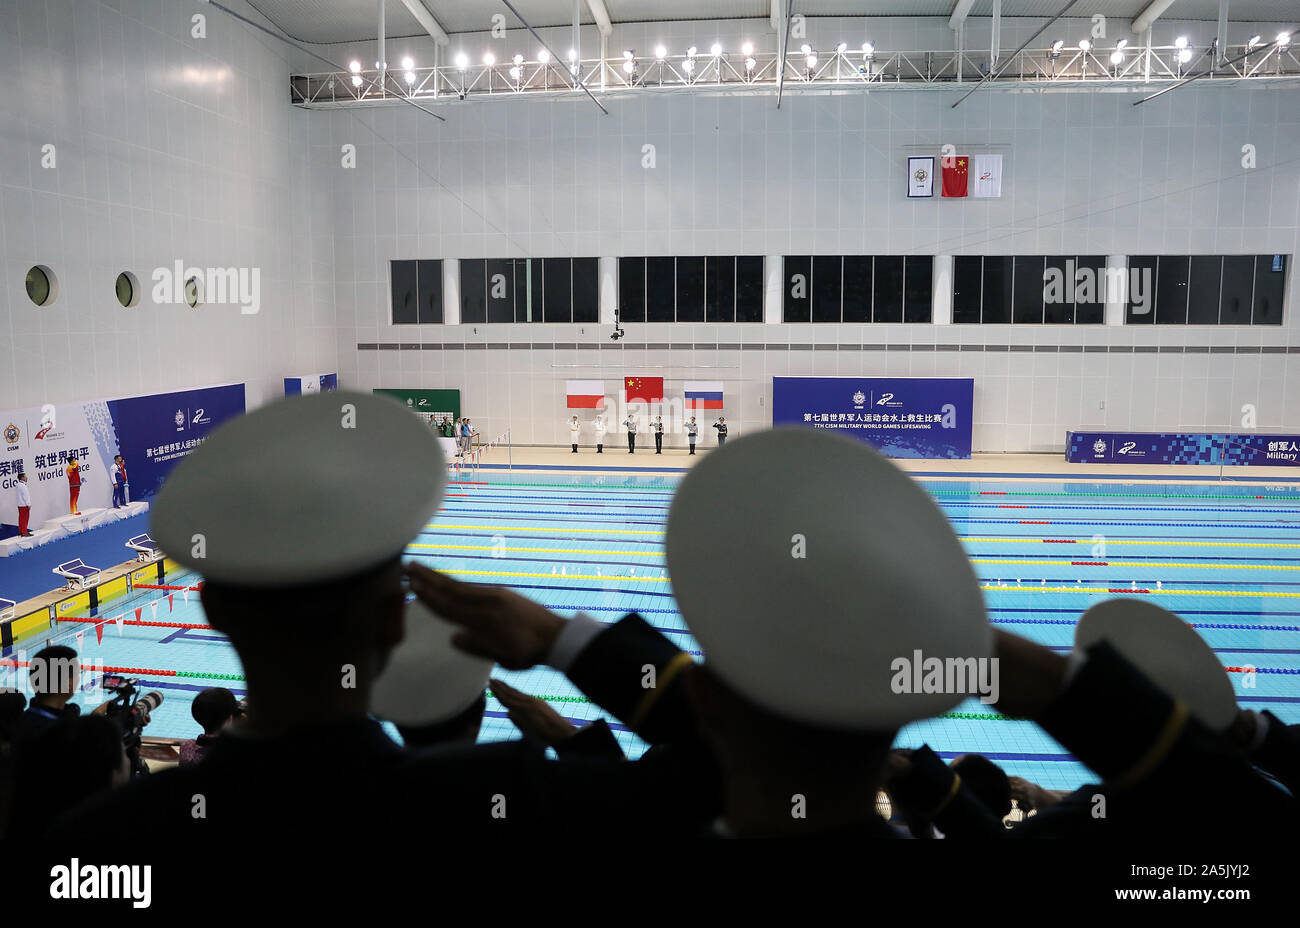 (191021) -- WUHAN, Oct. 21, 2019 (Xinhua) -- Soldiers salute during the awarding ceremony of the men's 100m rescue medley final of lifesaving at the 7th CISM Military World Games in Wuhan, capital of central China's Hubei Province, Oct. 21, 2019. (Xinhua/Wang Lili) Stock Photo